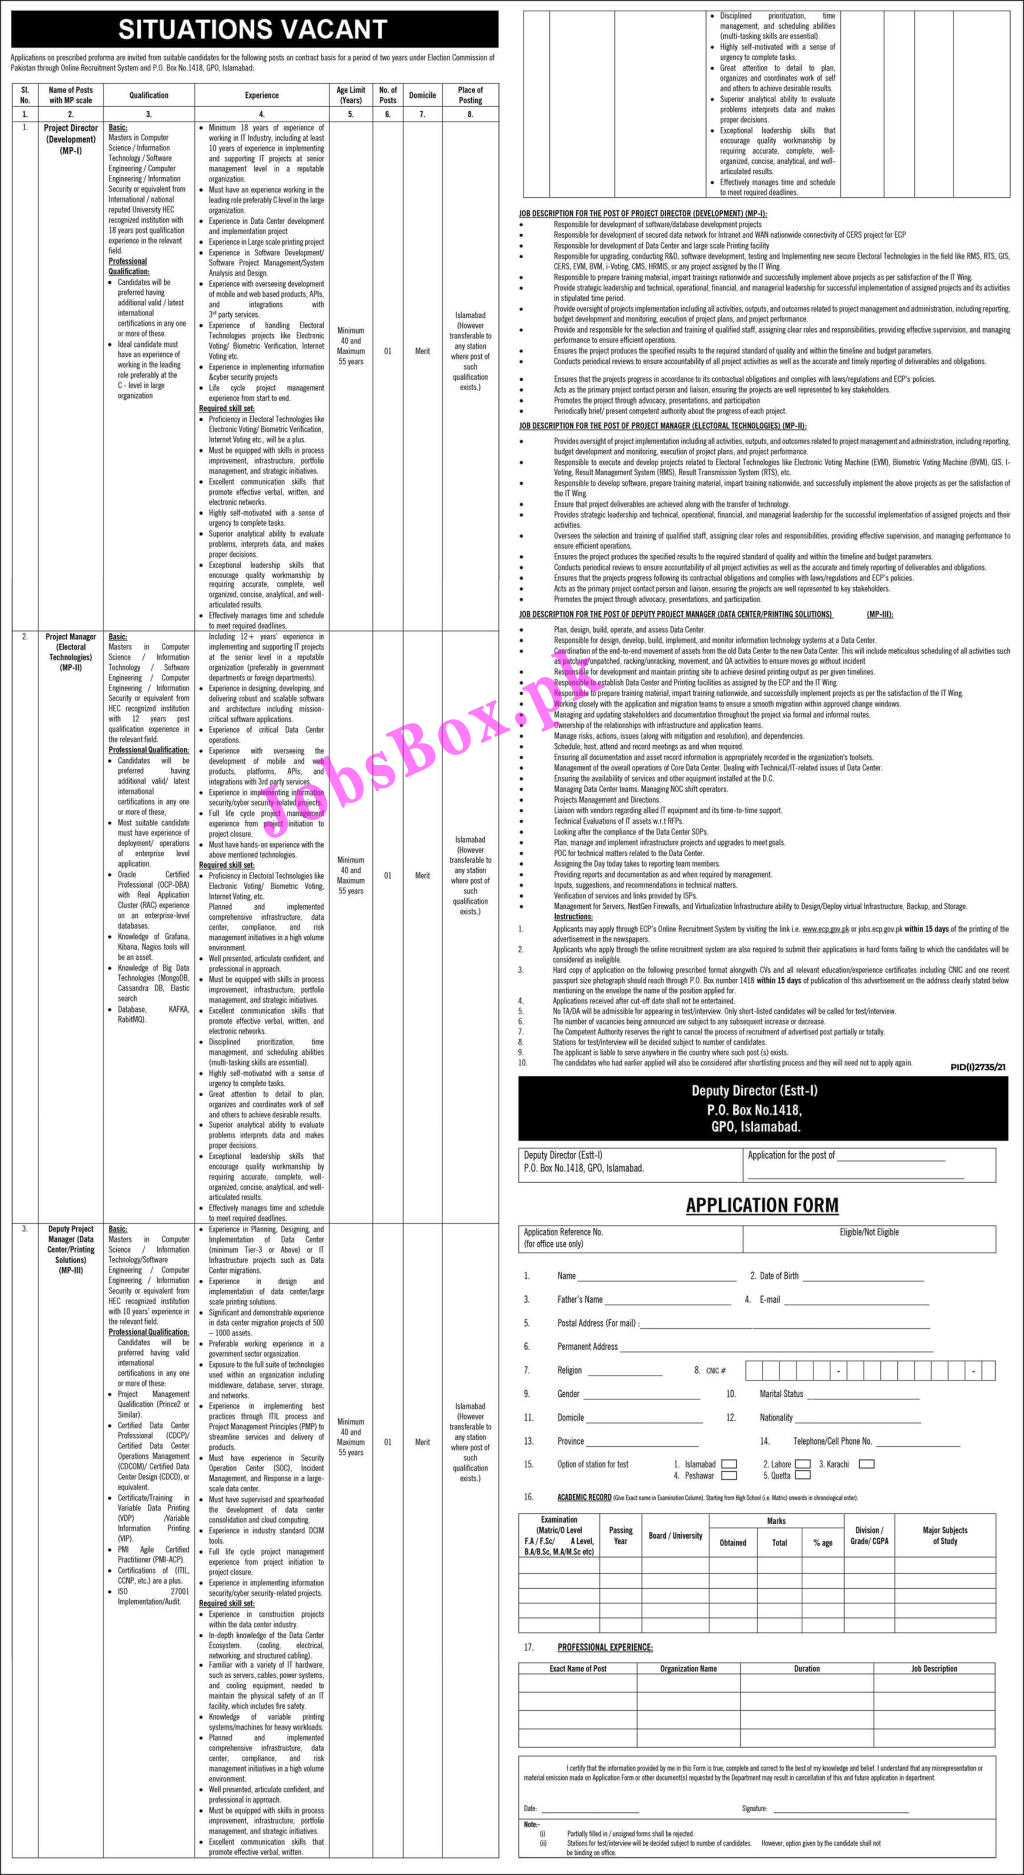 Election Commission of Pakistan ECP Jobs 2021 - Online Apply